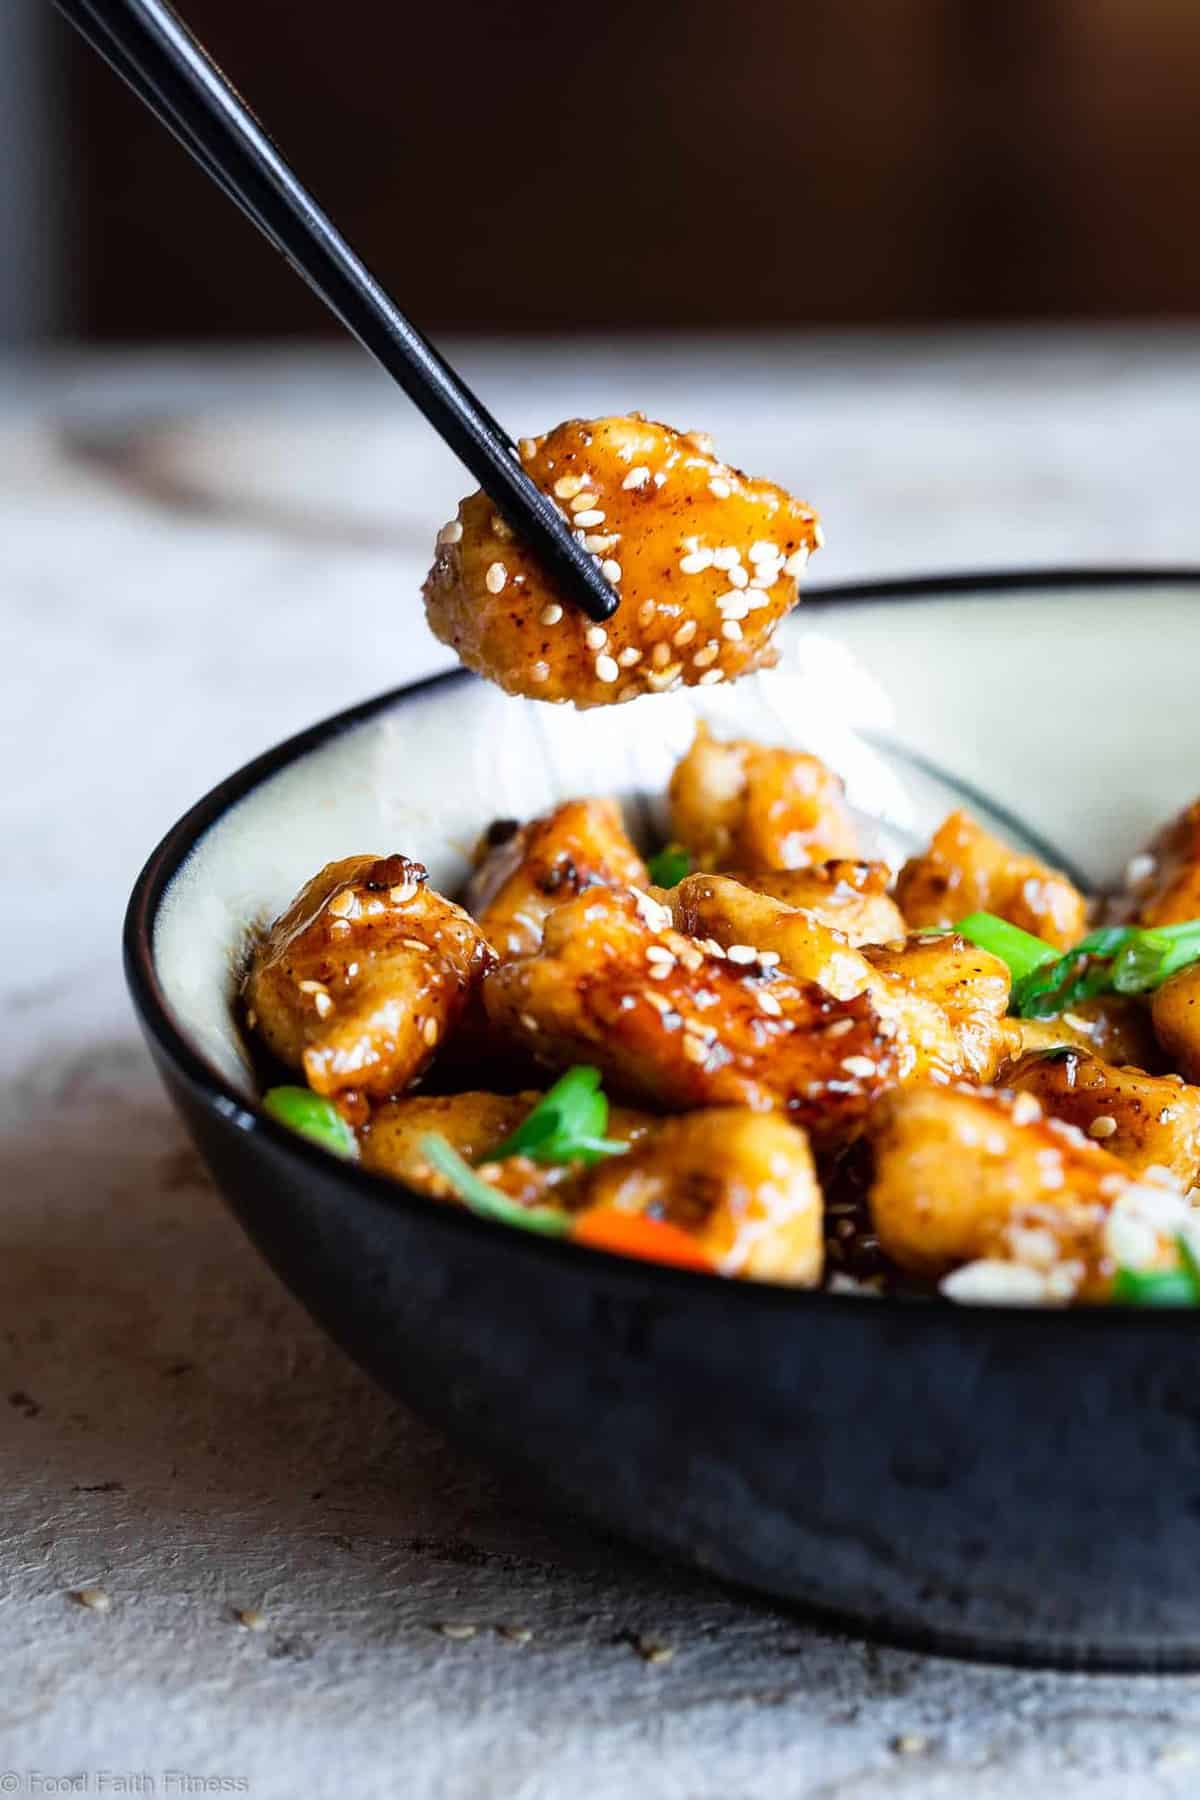 Easy Whole30 Sesame Chicken - This paleo friendly, and sugar/grain/dairy and gluten free CRISPY Sesame Chicken tastes just like takeout but is SO much better for you! A quick dinner that the whole family will love! | #Foodfaithfitness | #Glutenfree #Paleo #Whole30 #Sugarfree #Healthy